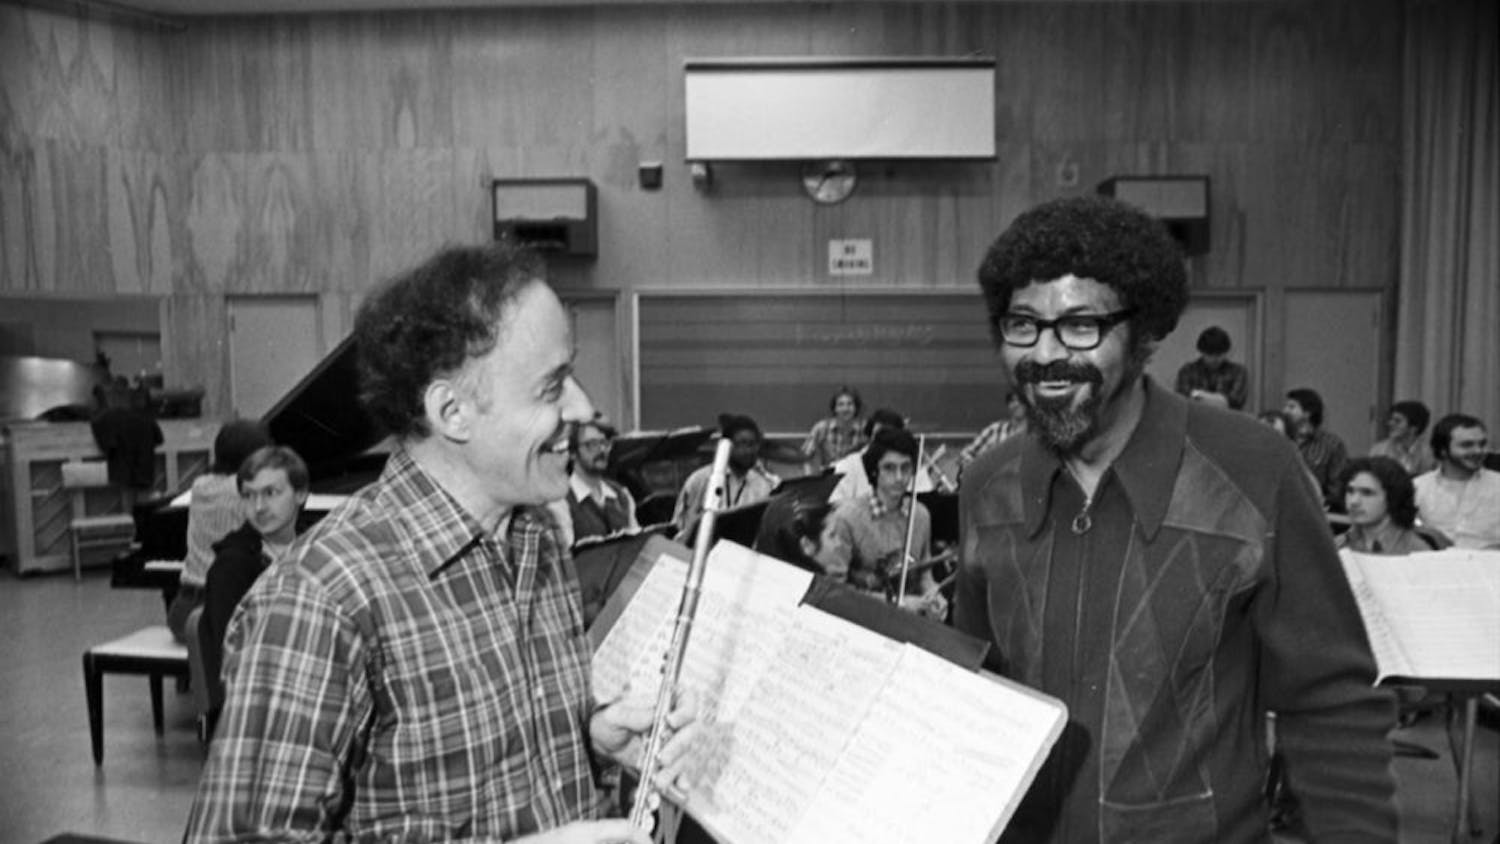 An IU News Bureau release dated Nov. 18, 1982, accompanies this image. It reads, in part: "James Pellerite and David Baker go over the score for Baker's 'Concerto for Flute and Jazz Band,' which Pellerite will perform with the IU Jazz Ensemble, Monday, Nov. 22, at 8 p.m. in the Musical Arts Center...""